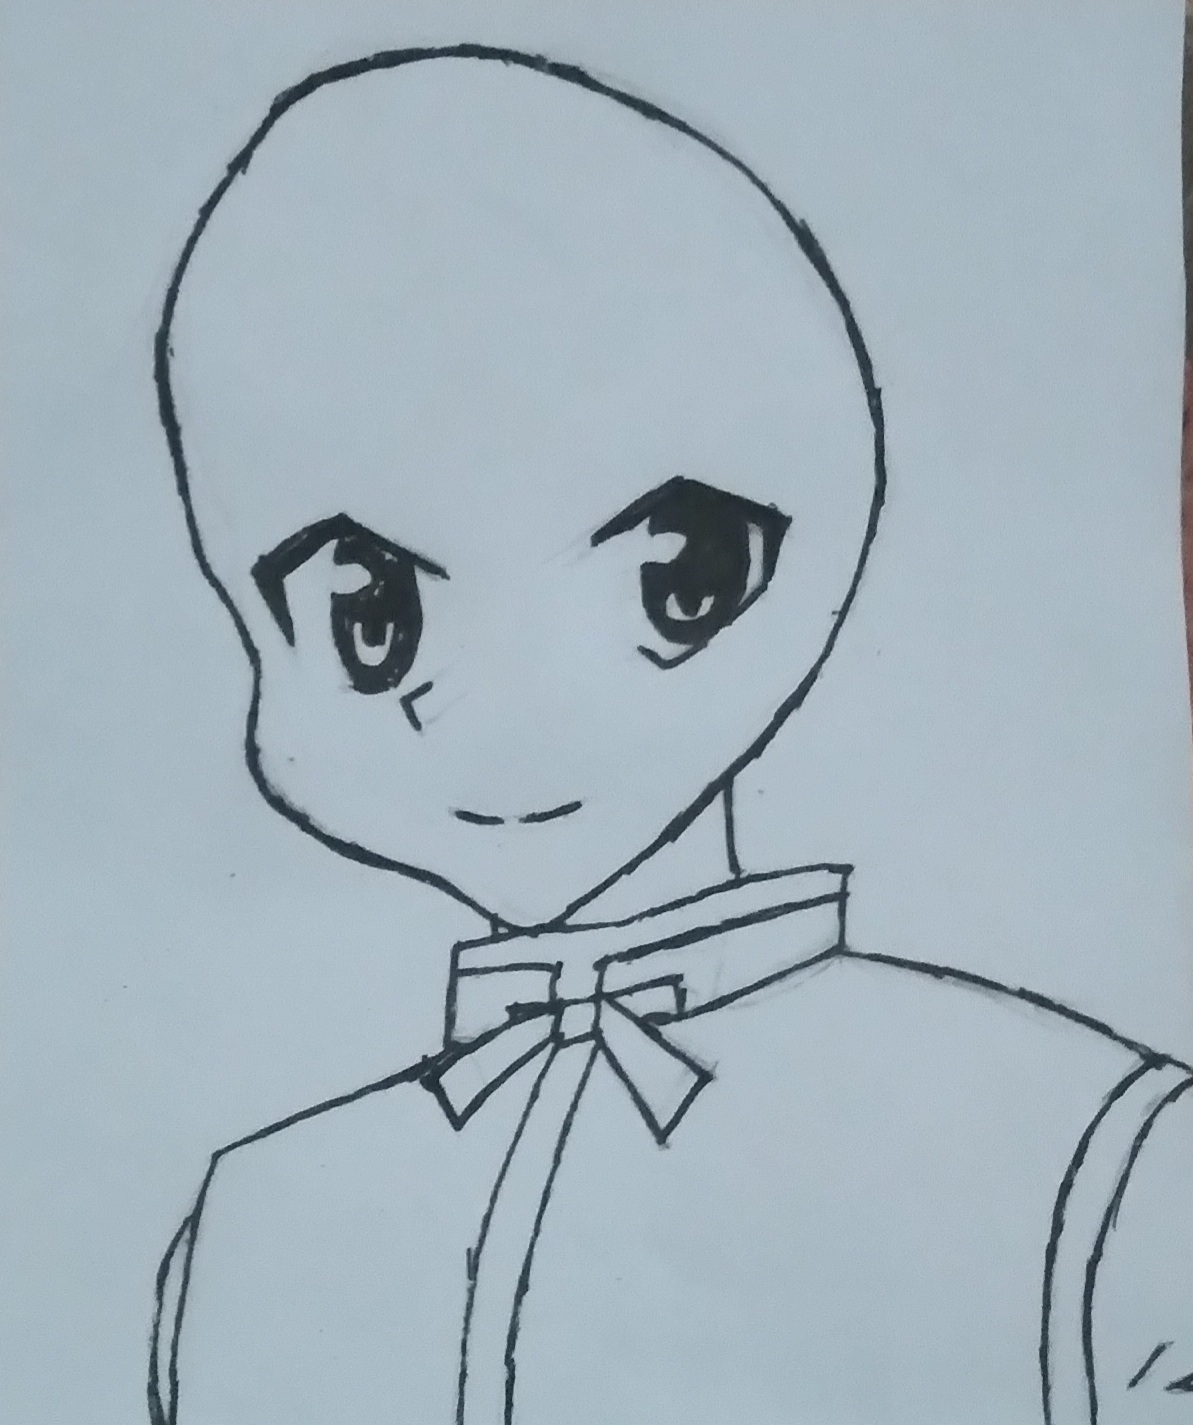 To offset your scarring from Bald Kurapika, I present a redrawn